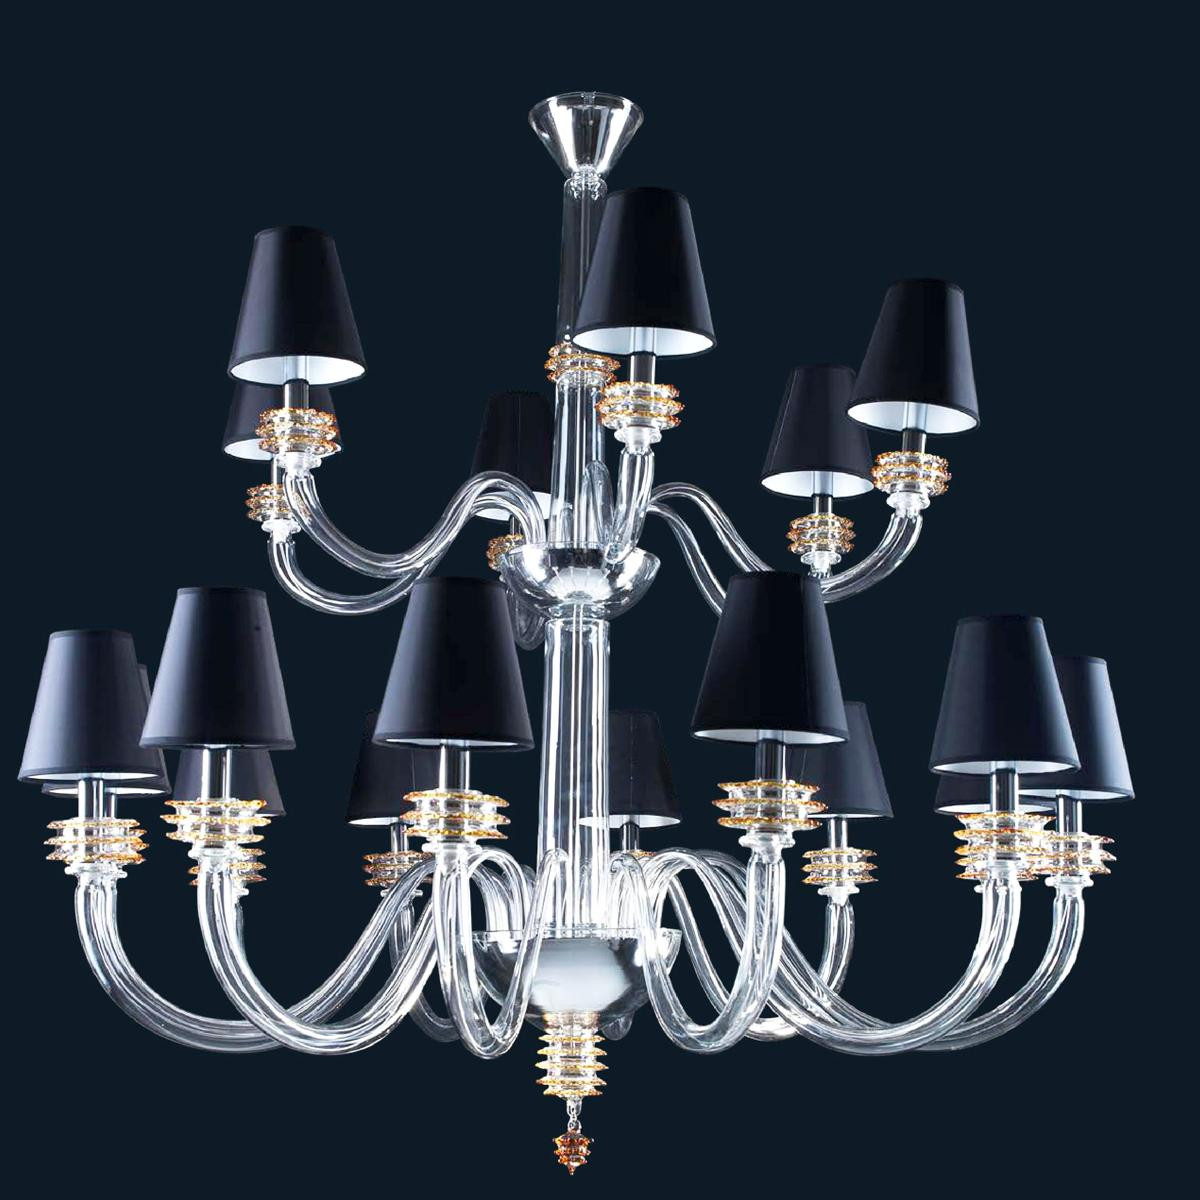 "Dainton" Murano glass chandelier with lampshades - 12+6 light - transparent and topaz